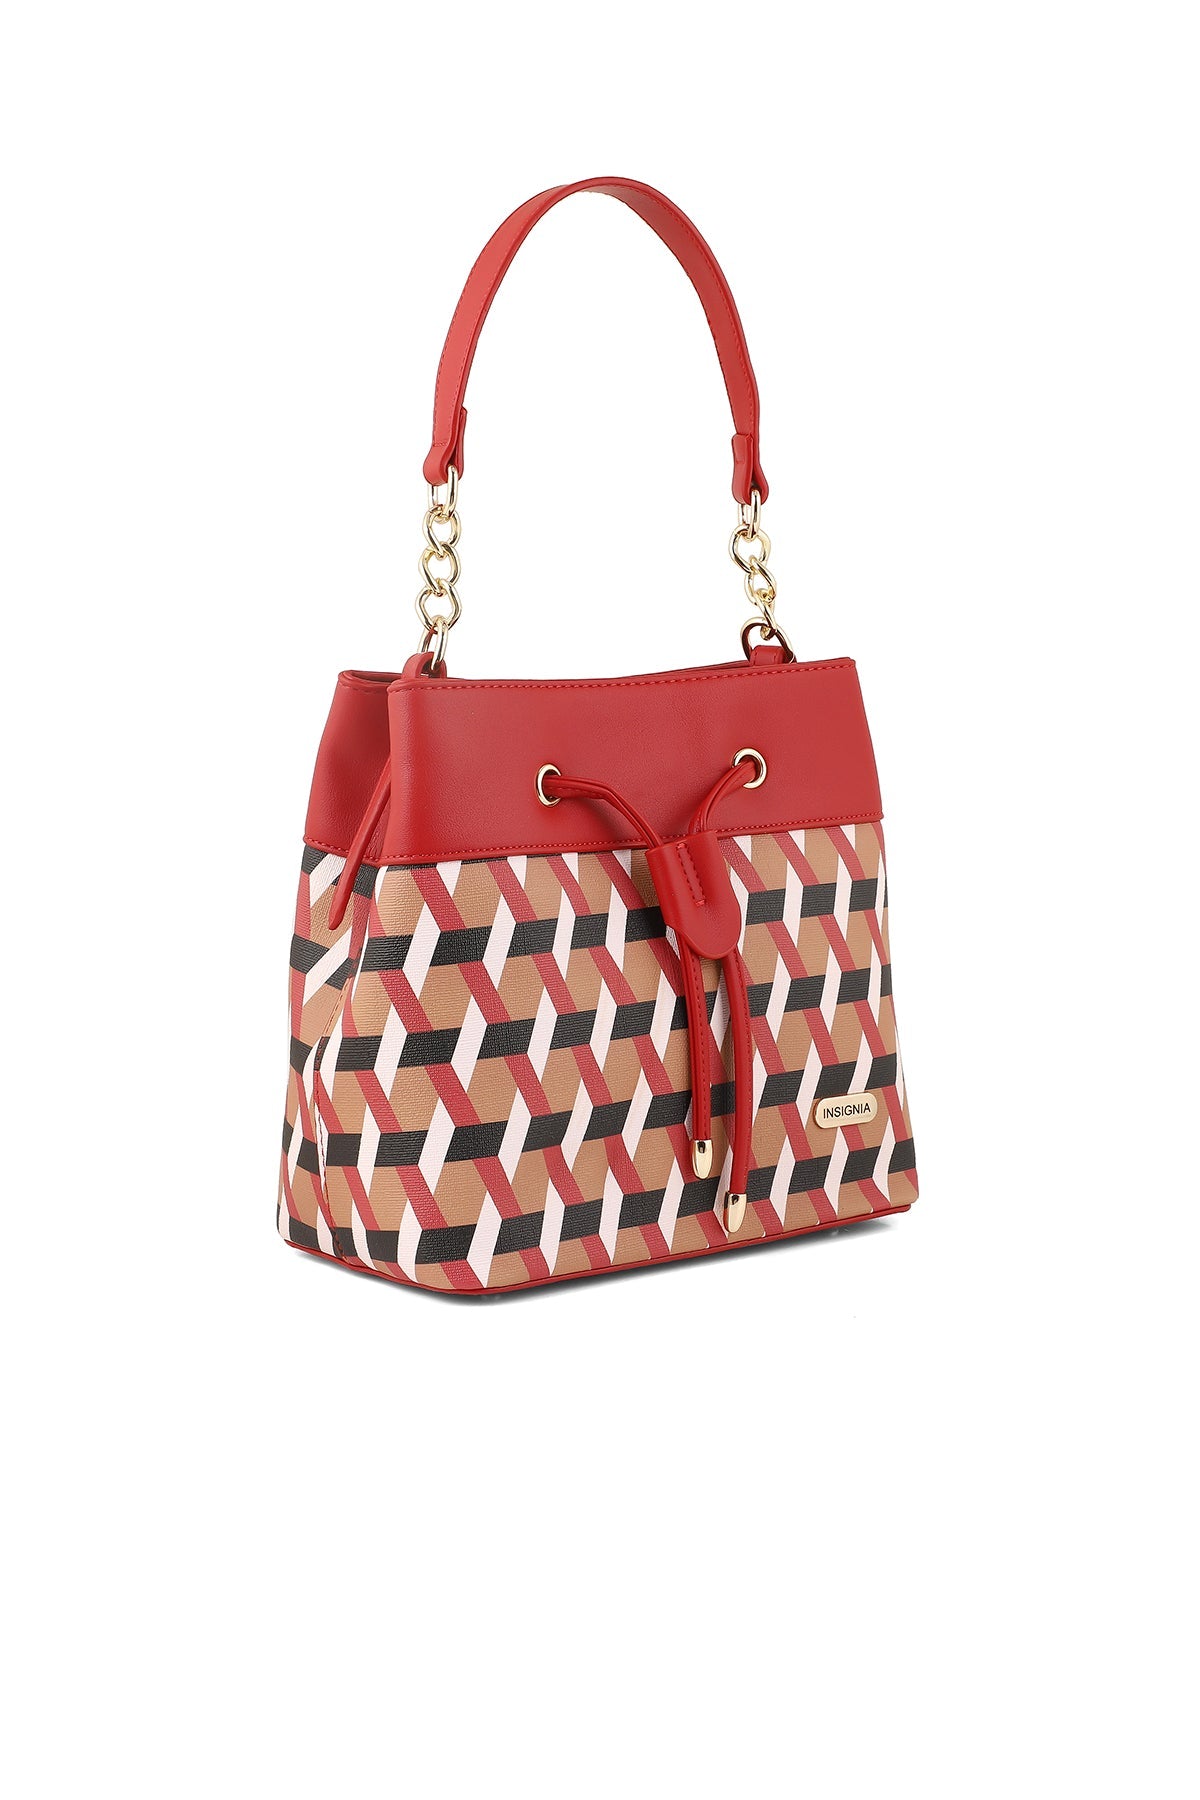 Top Handle Hand Bags B14947-Red